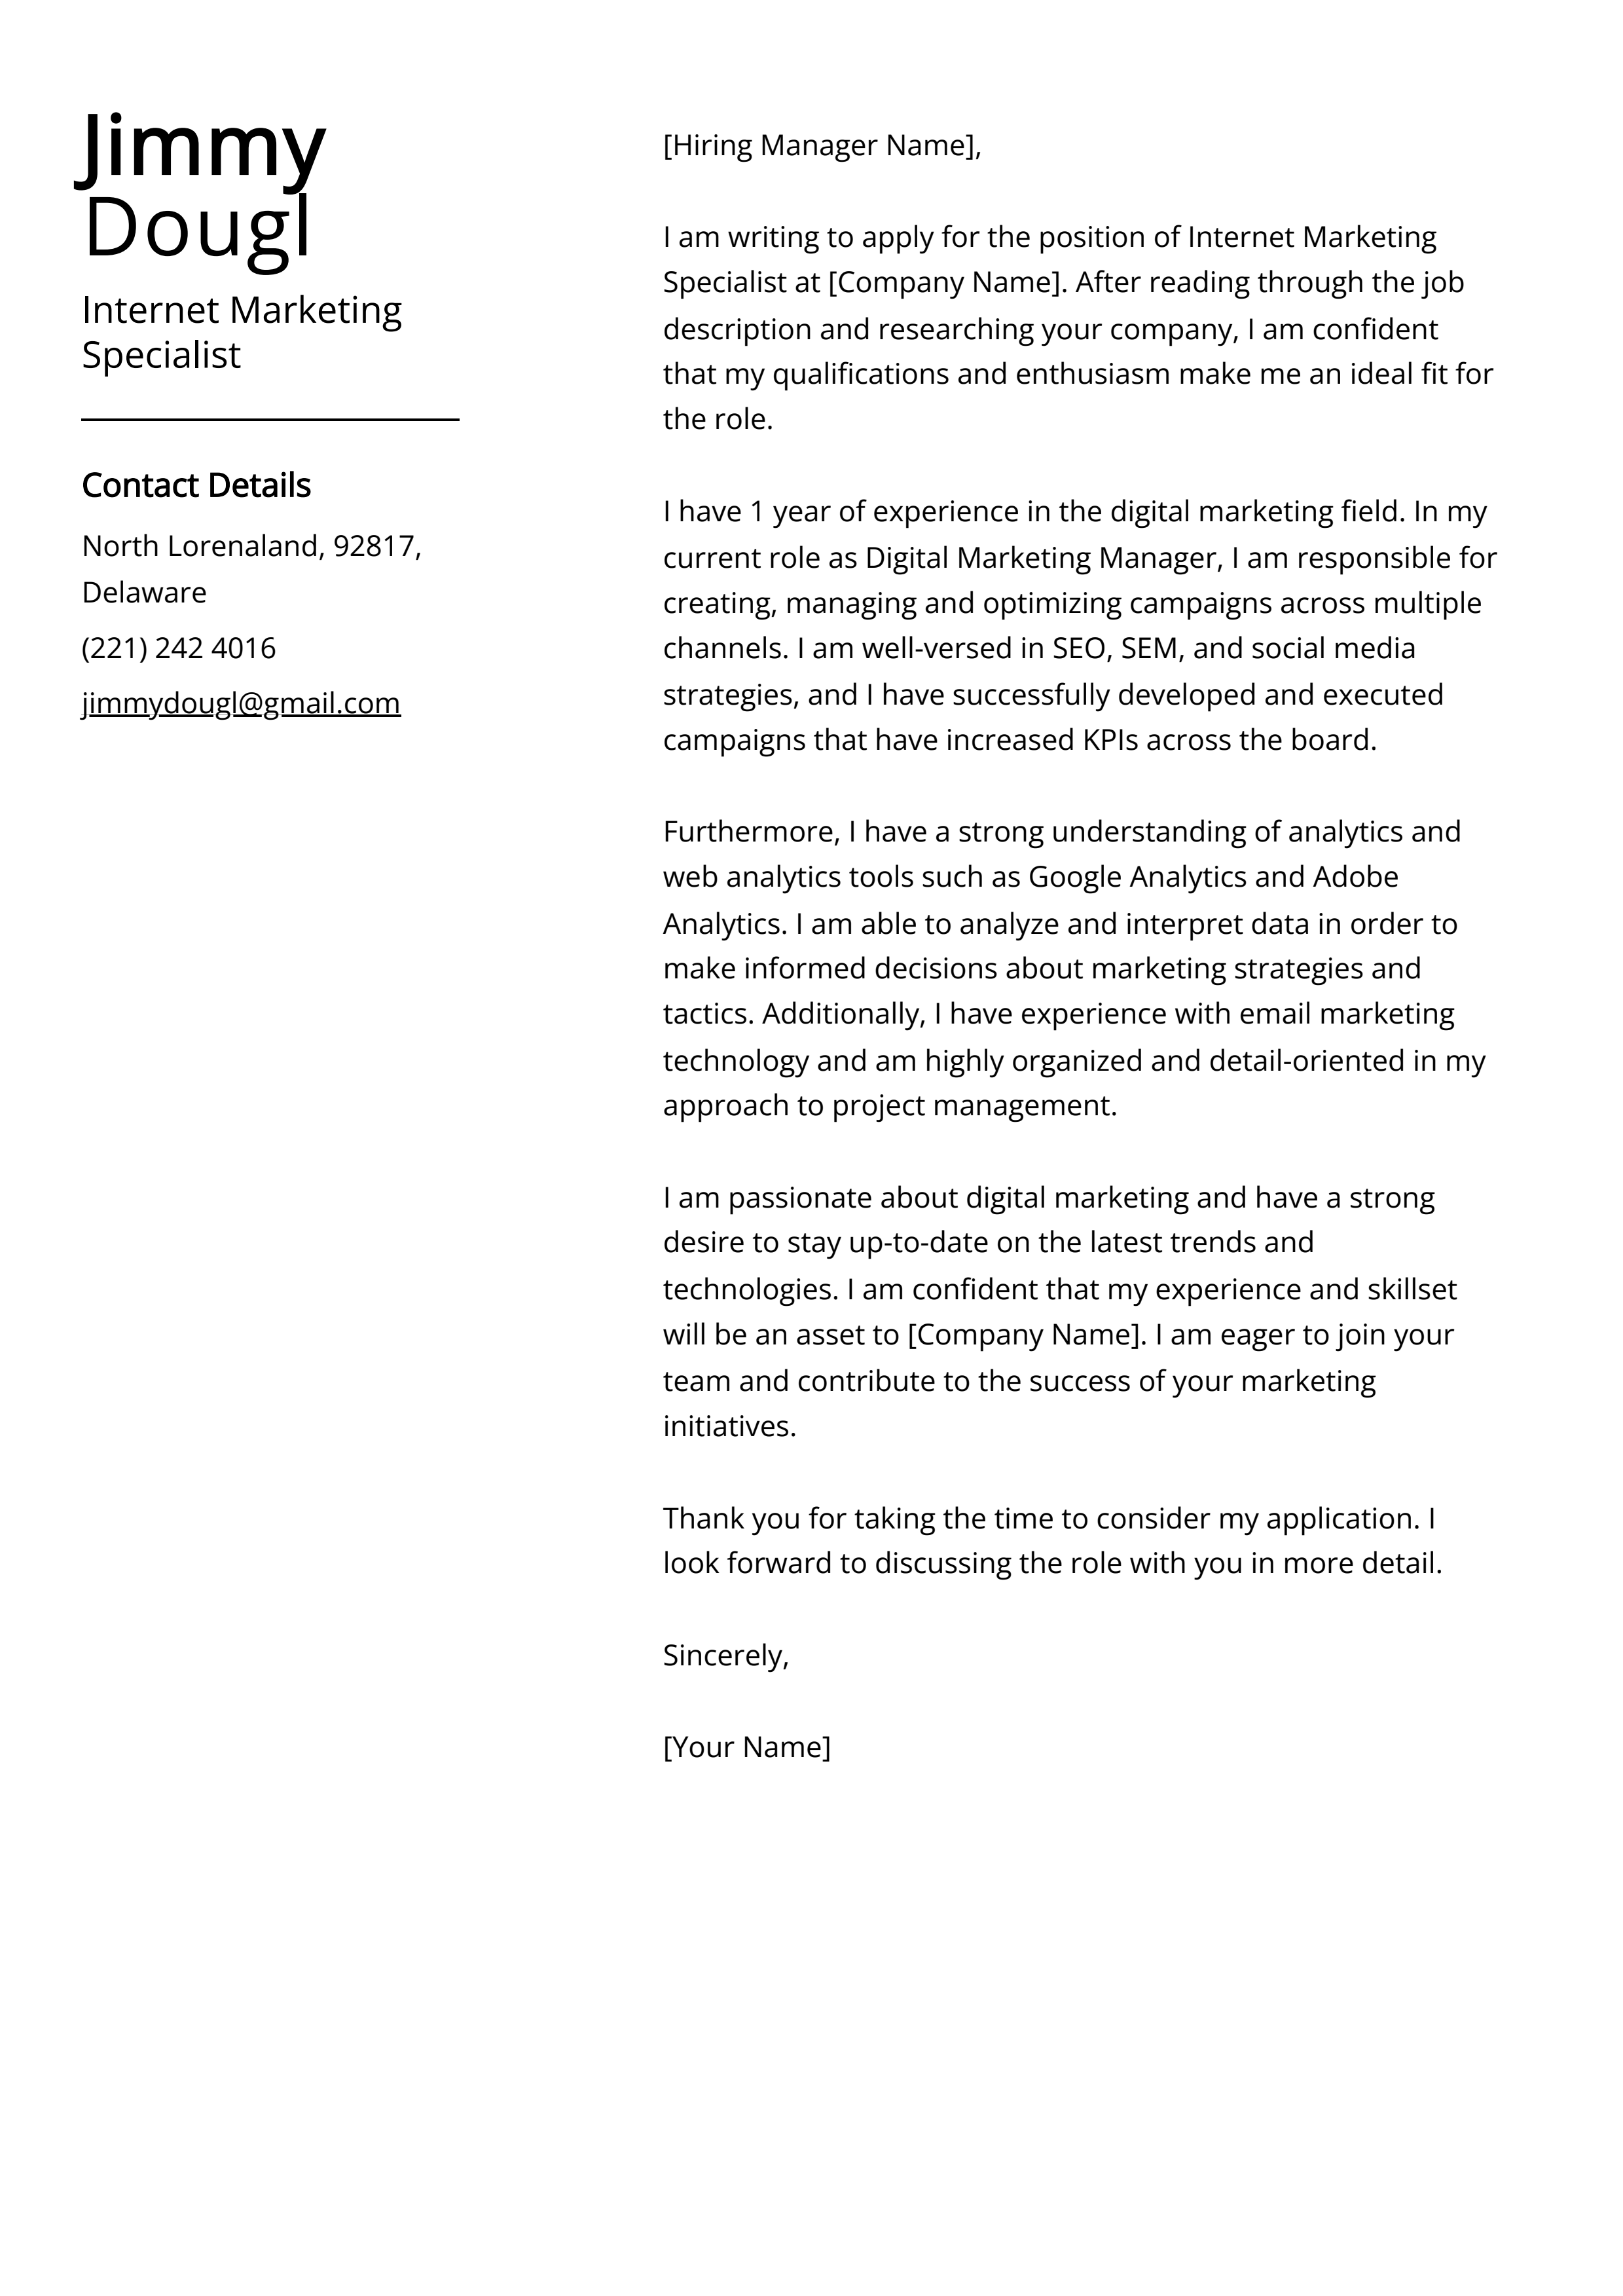 Internet Marketing Specialist Cover Letter Example